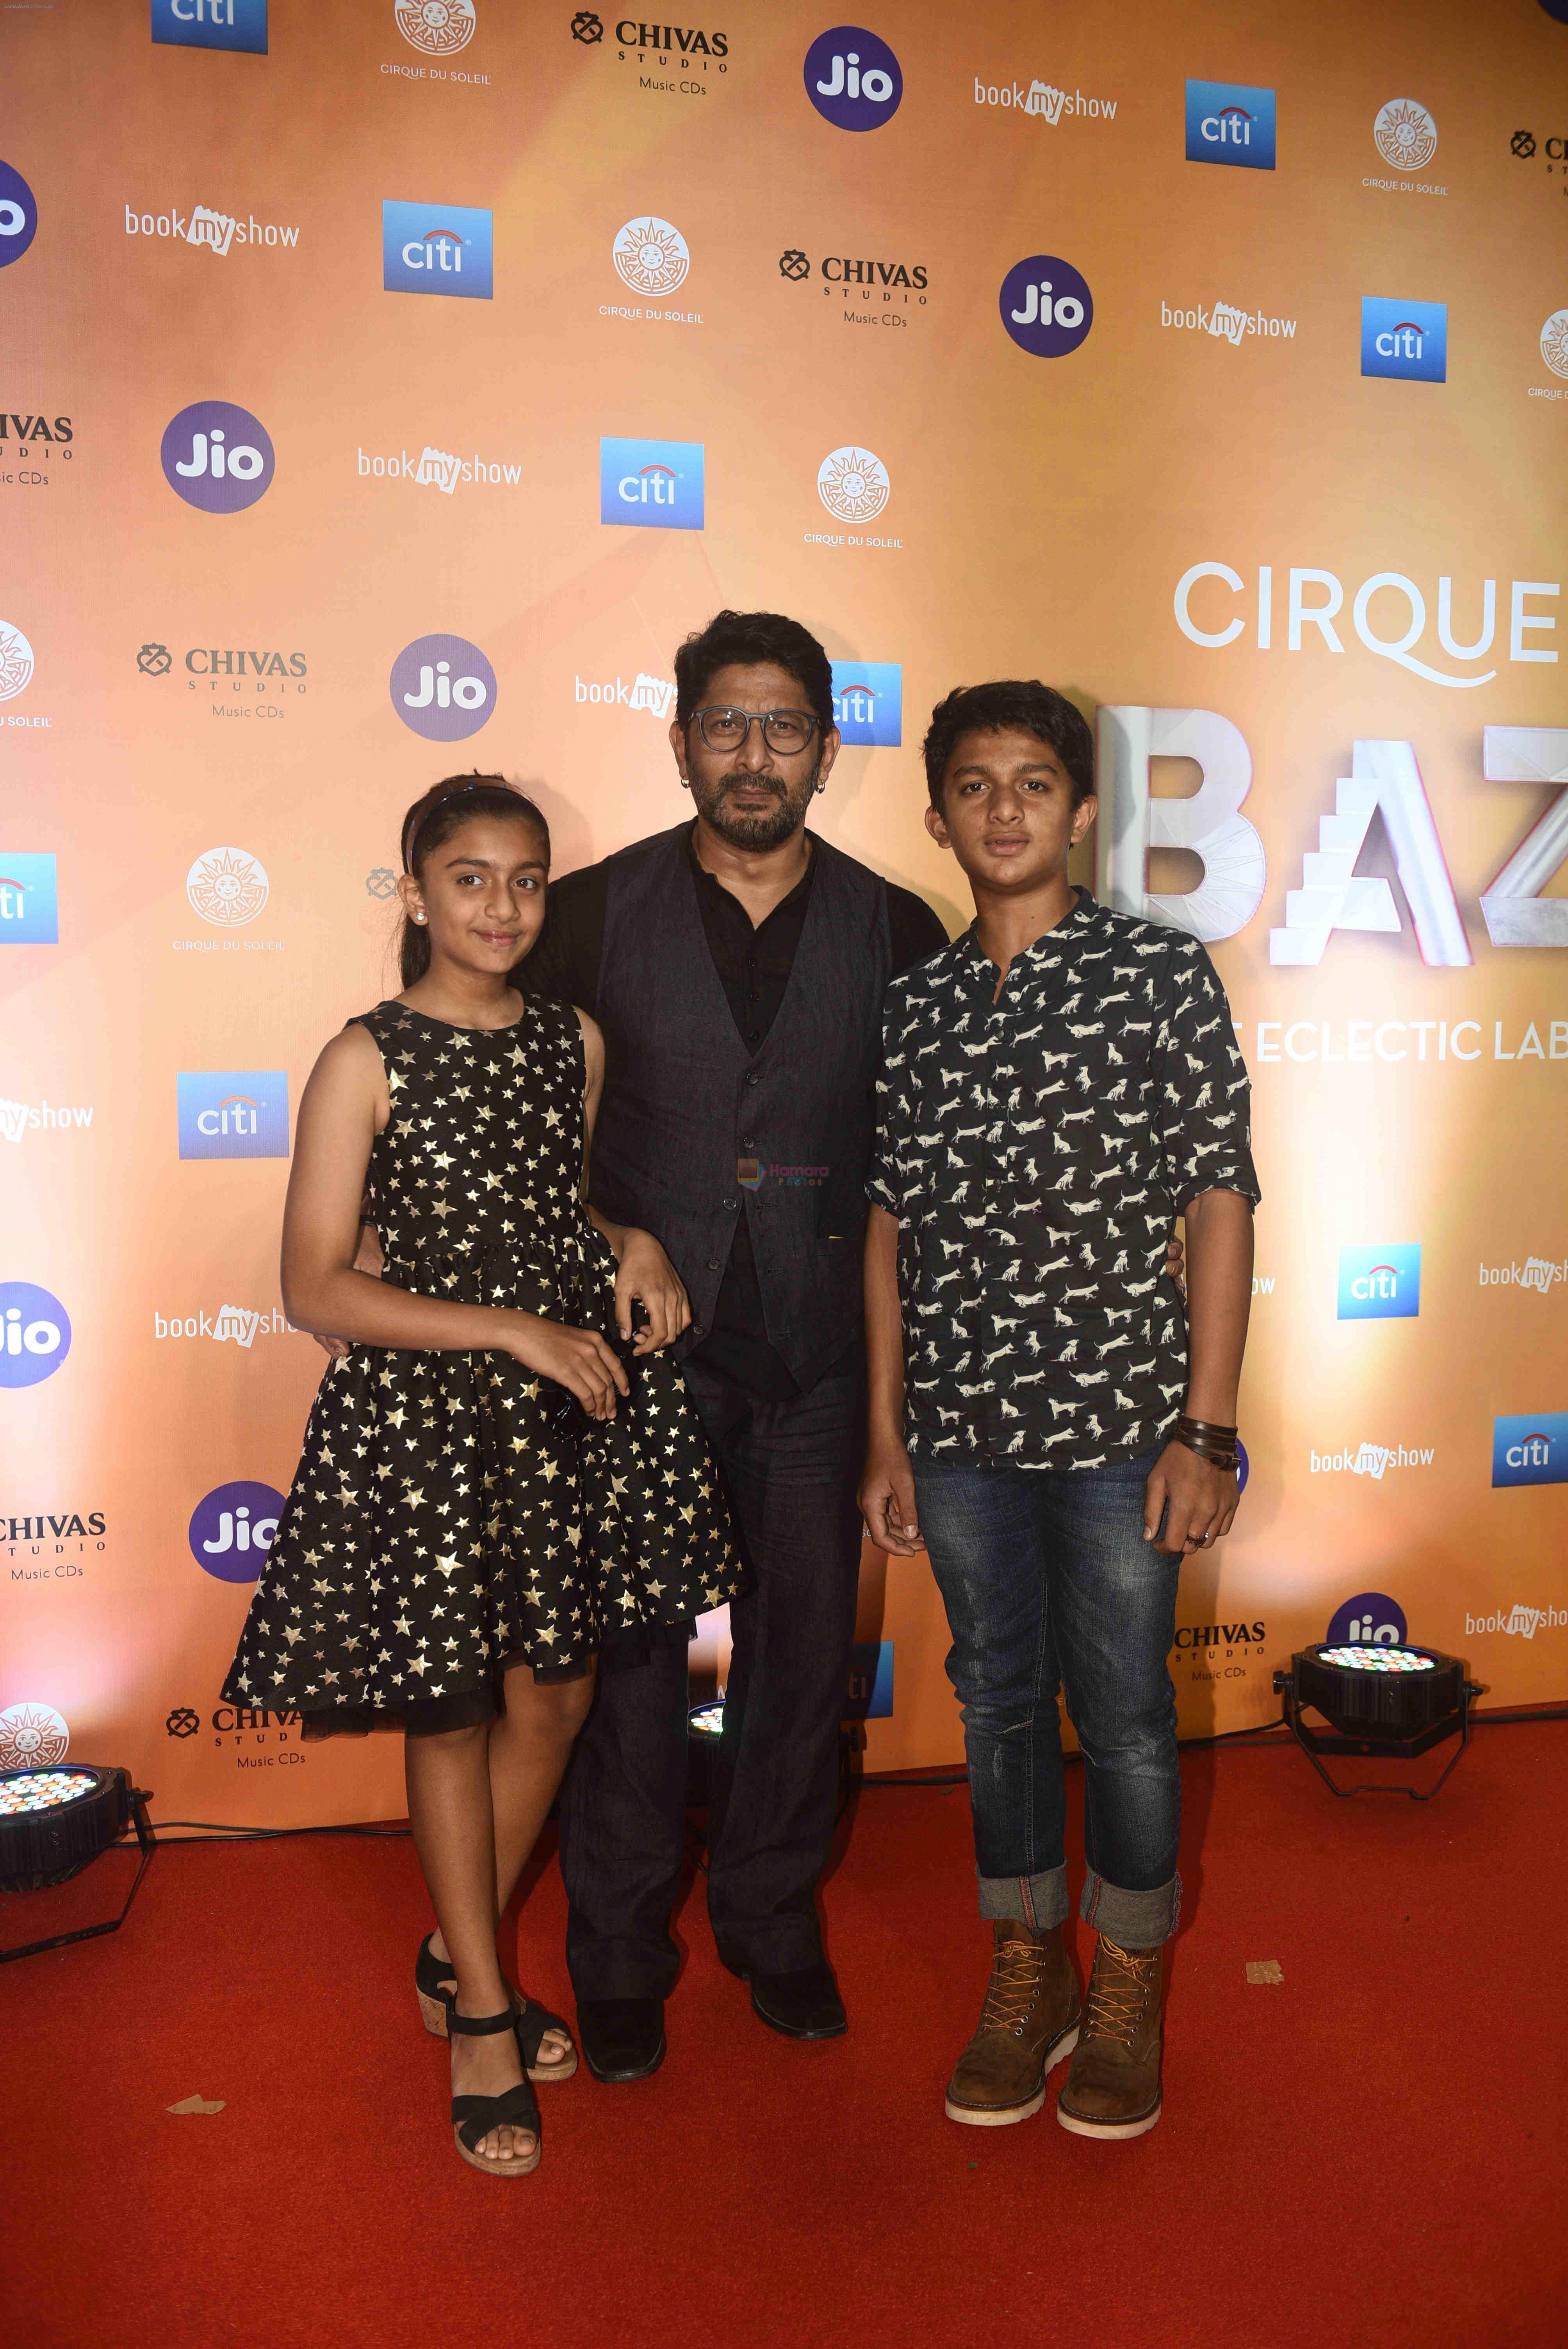 Arshad Warsi at The Red Carpet Of The World Premiere Of Cirque Du Soleil Bazzar on 14th Nov 2018